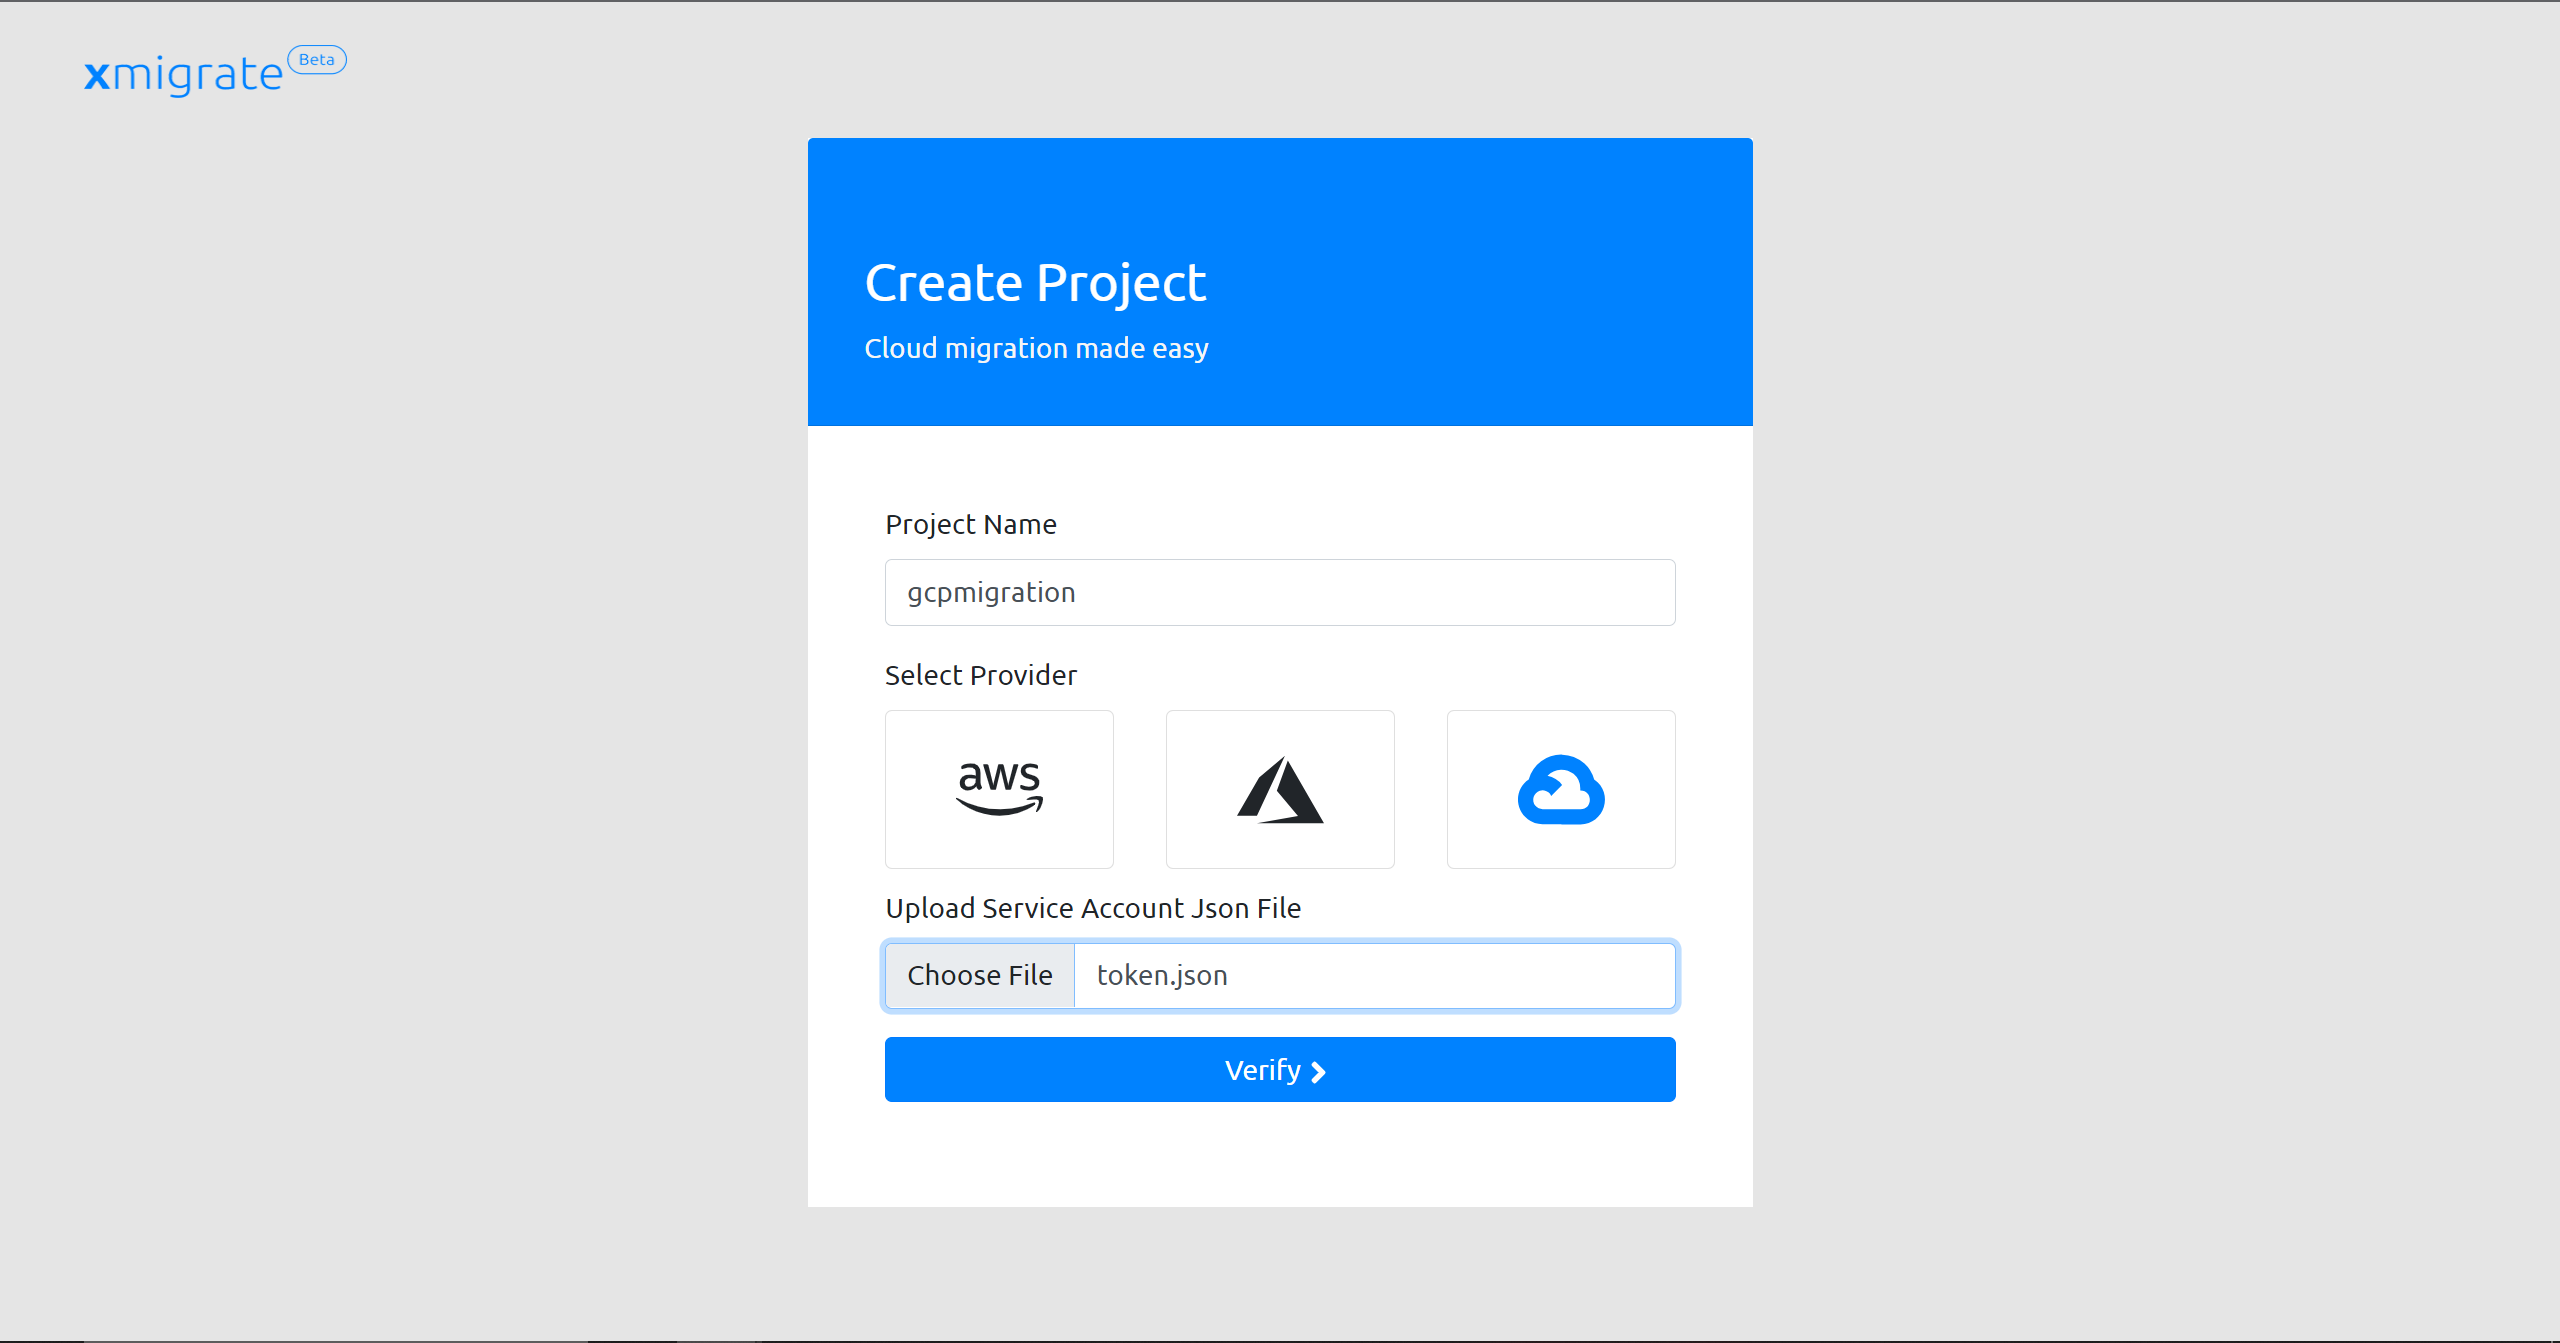 xmigrate gcp project creation